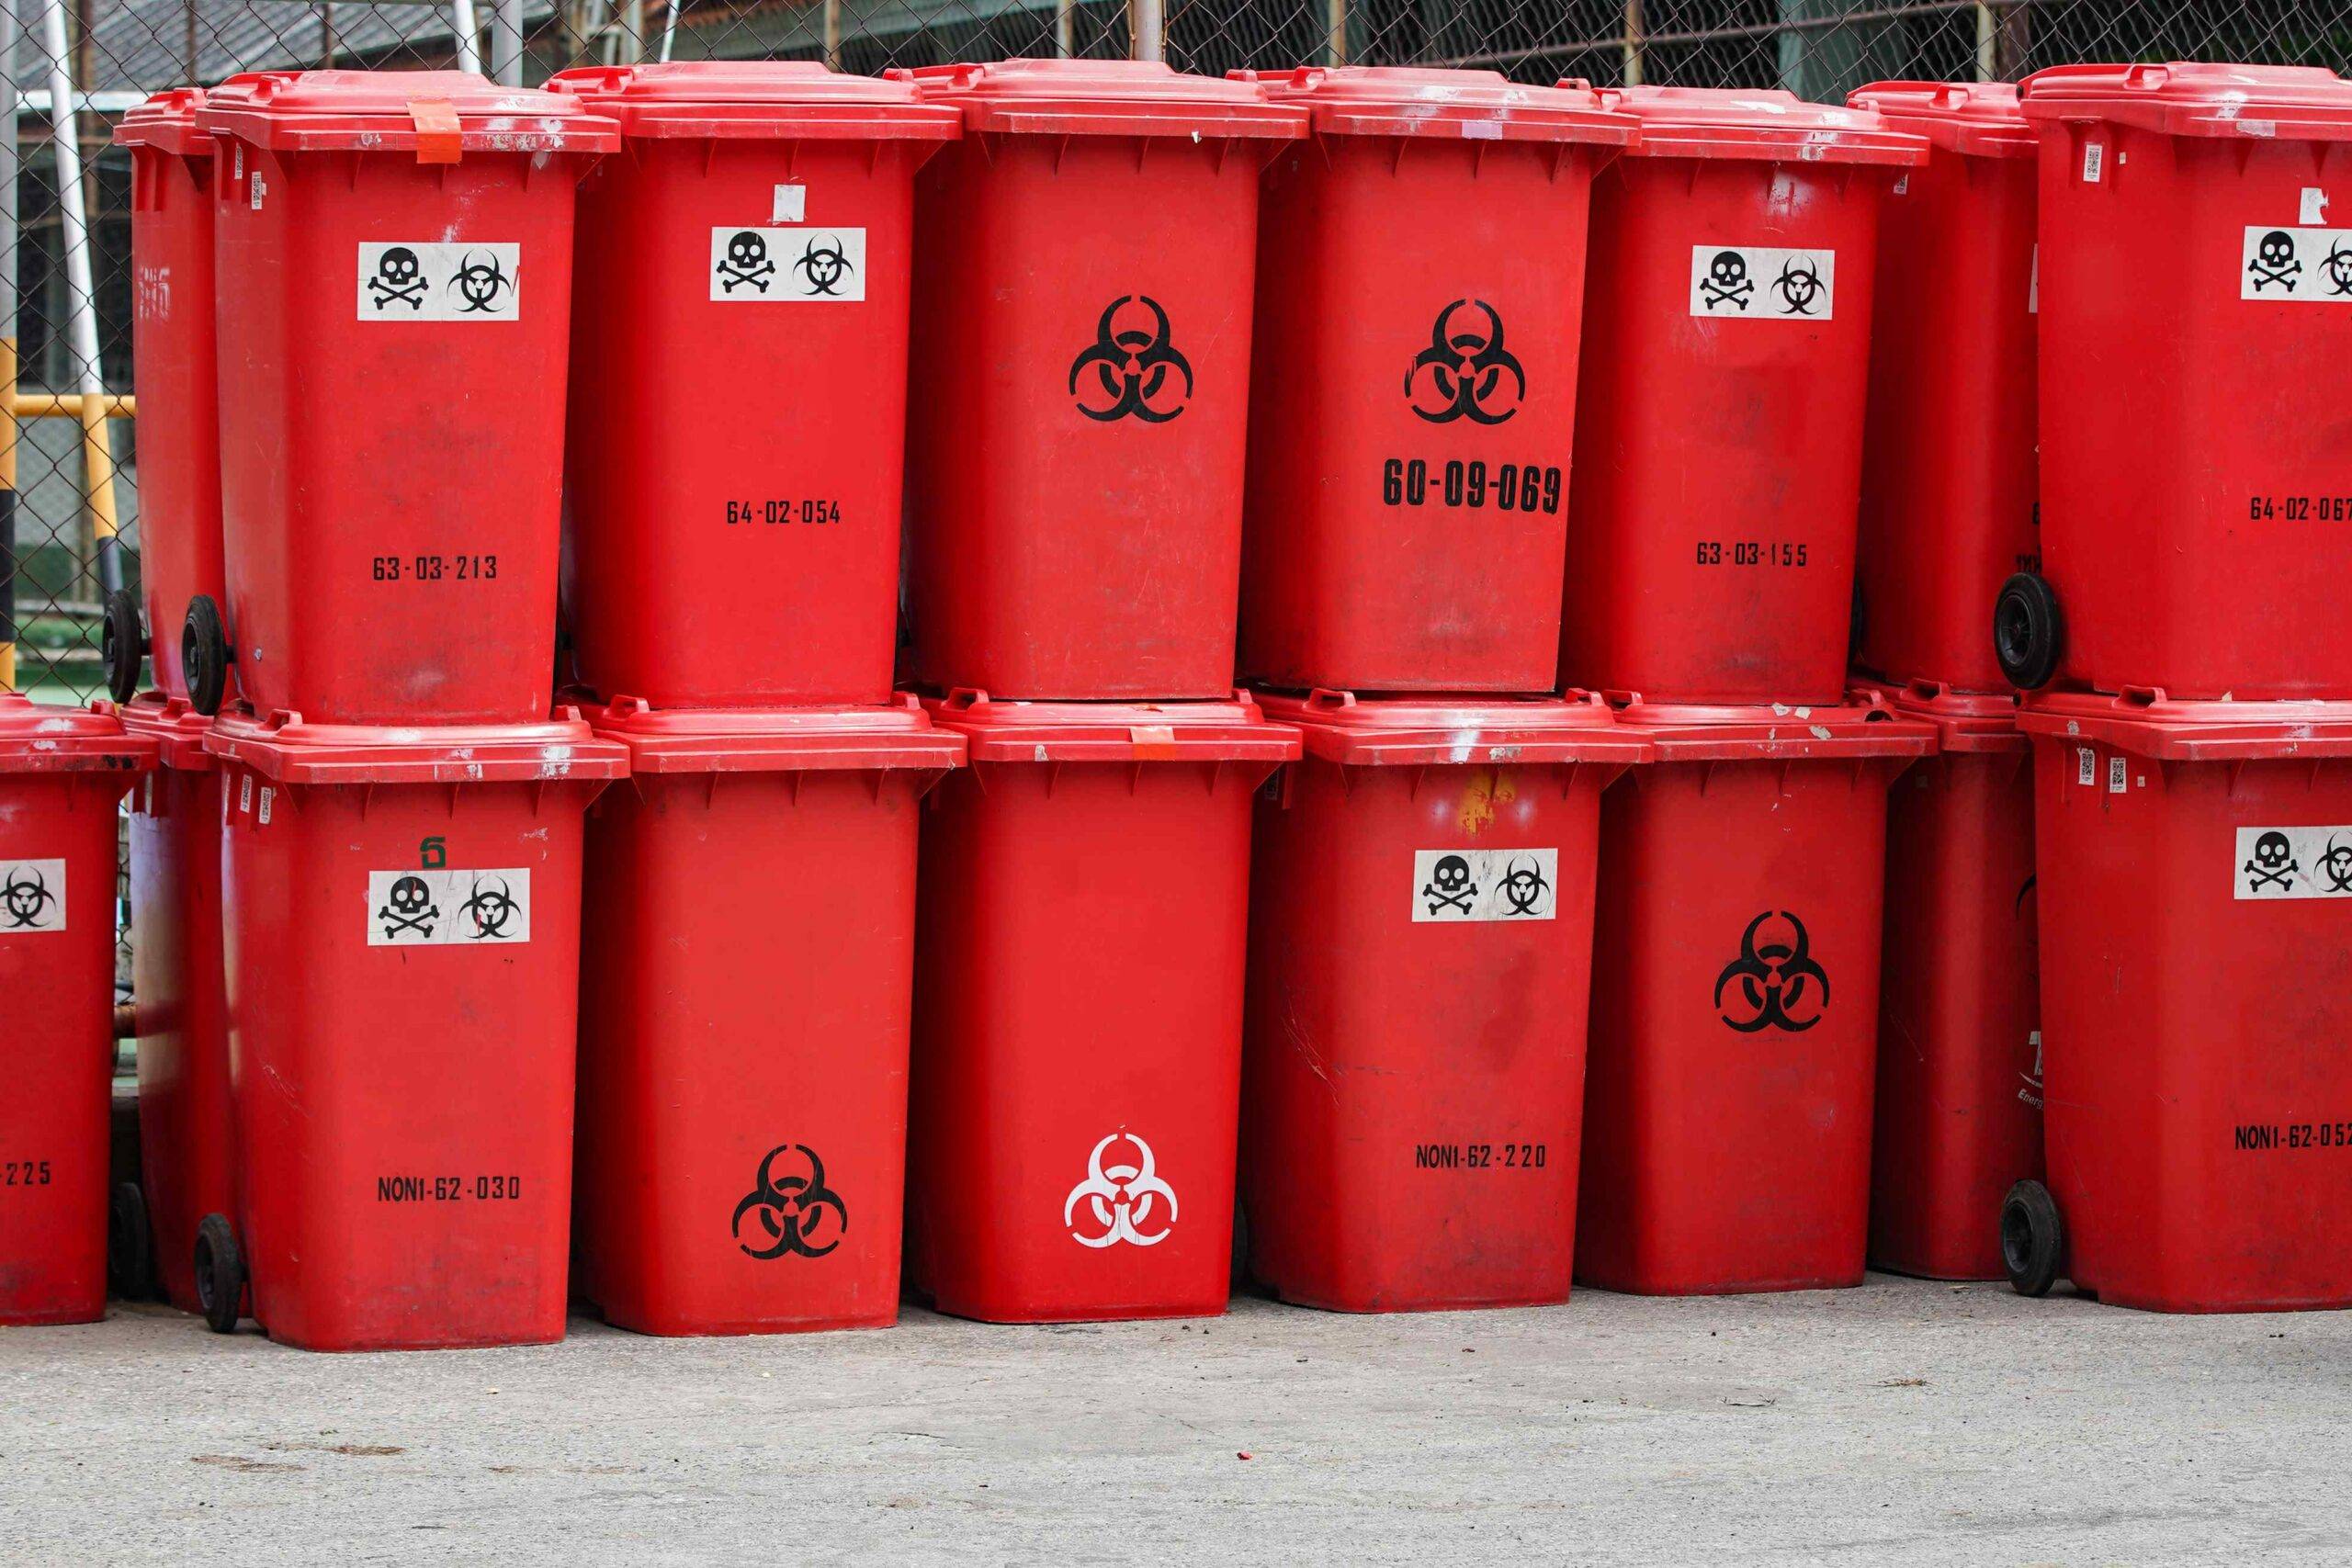 medical waste red plastic waste bins 2022 11 01 03 52 46 utc scaled - Decon Solutions Australia Services